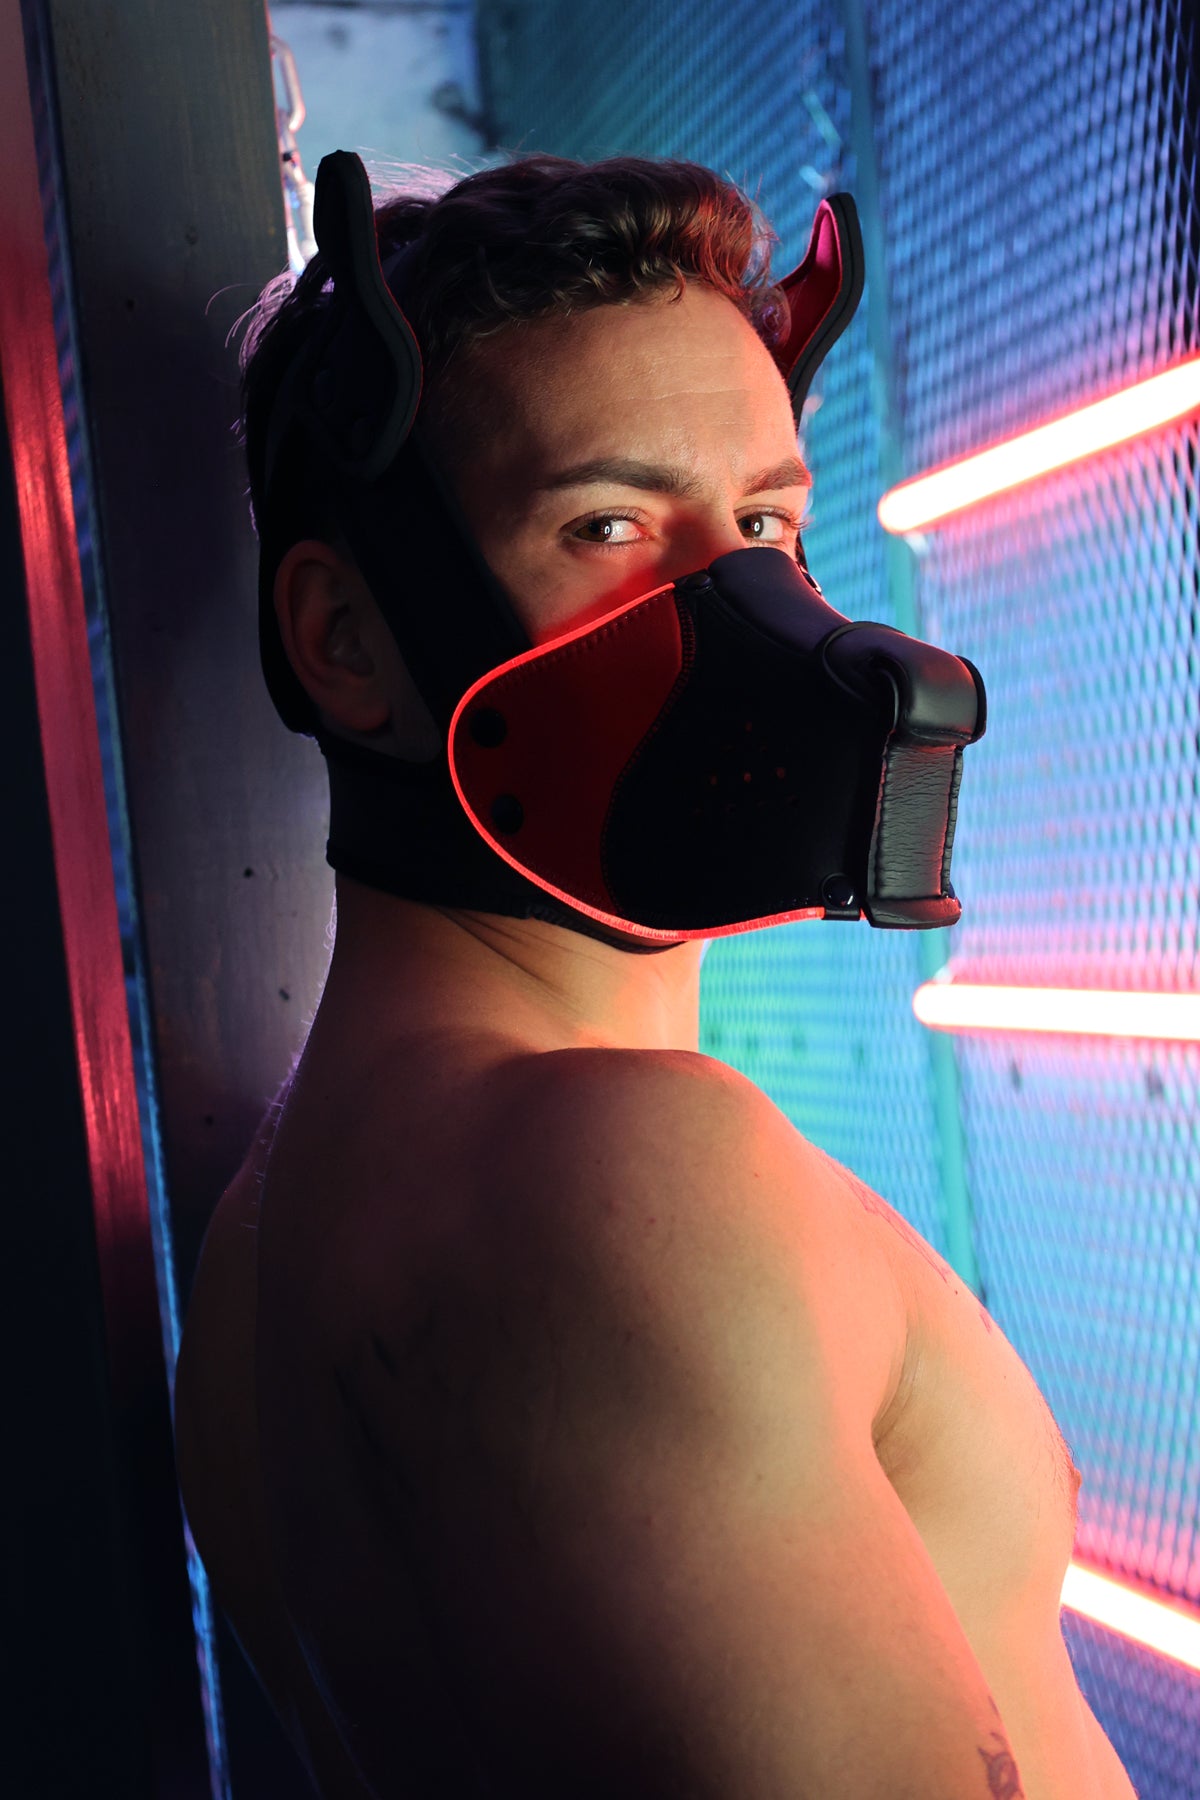 Poundtown Pup Mask 2.0 - Red